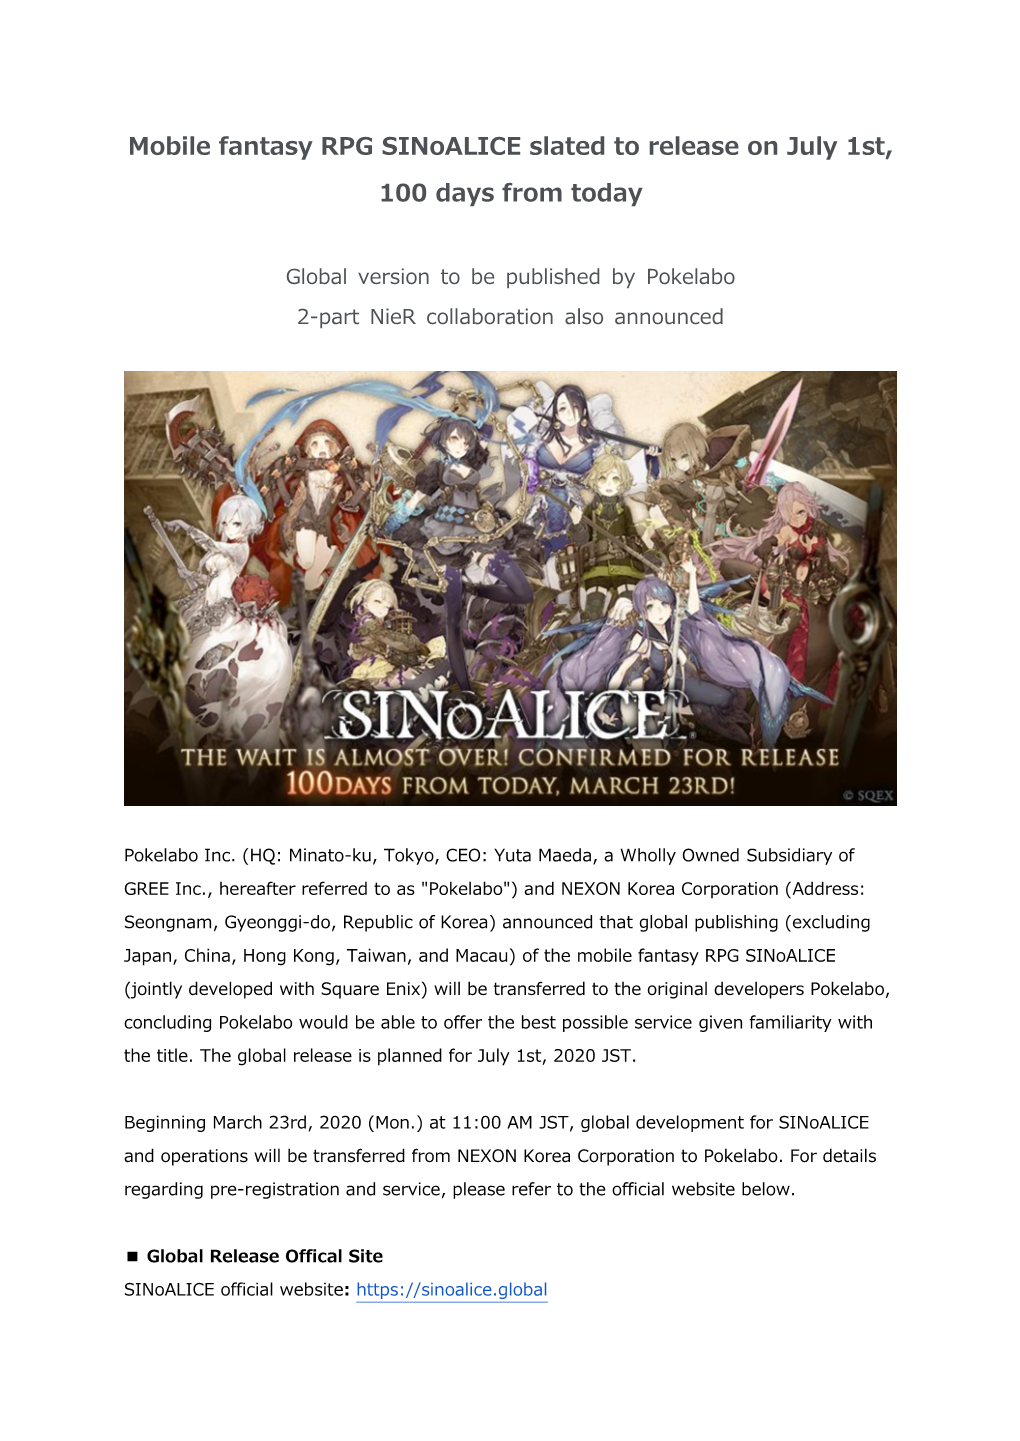 Mobile Fantasy RPG Sinoalice Slated to Release on July 1St, 100 Days from Today